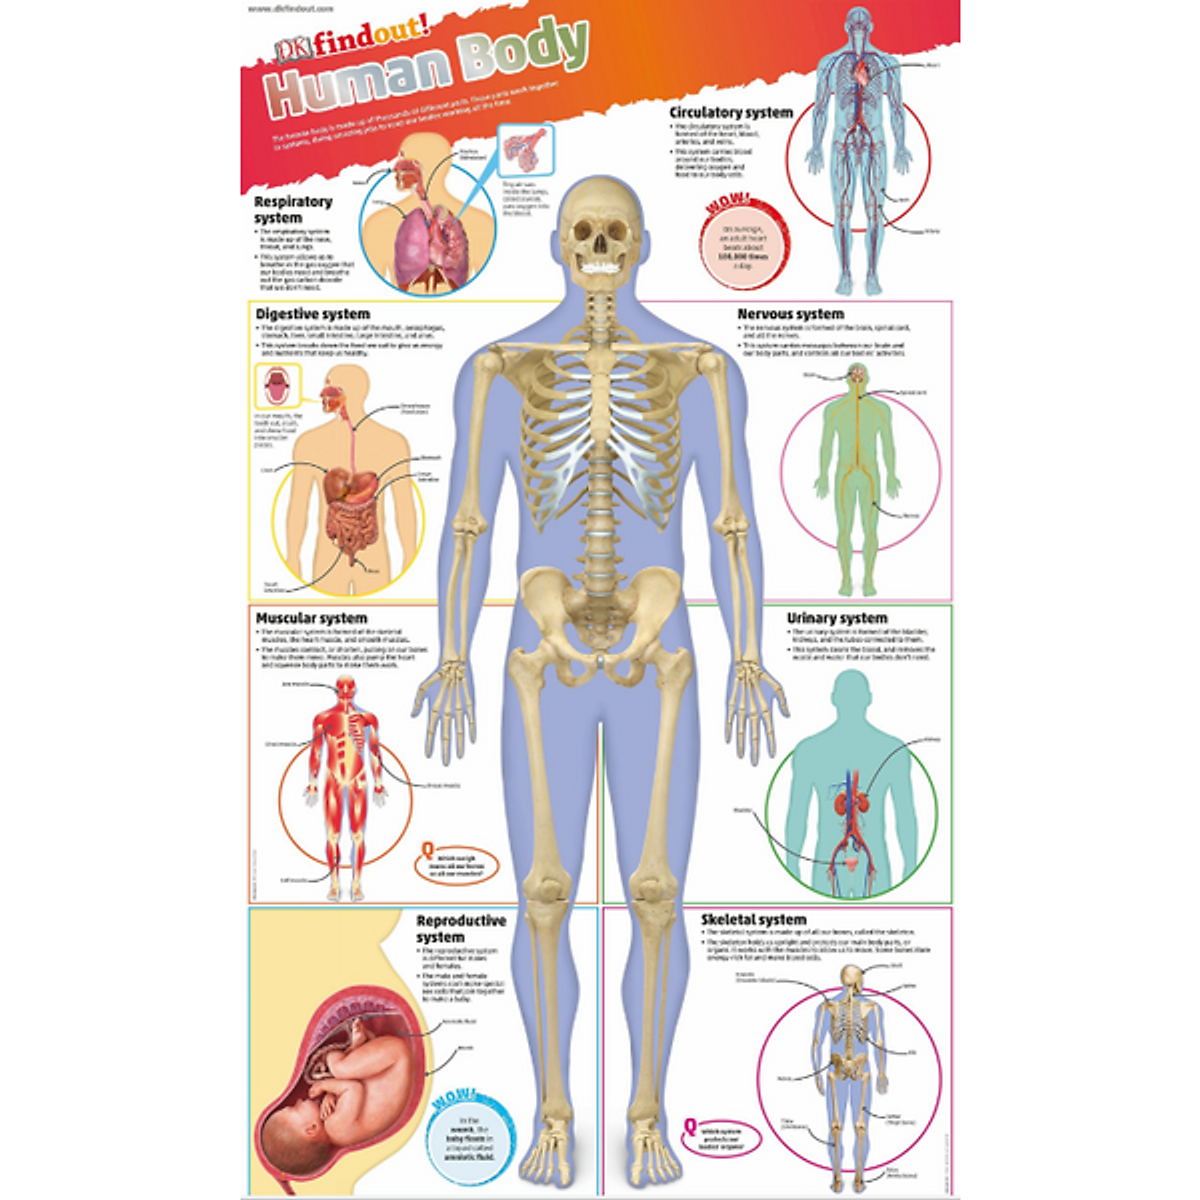 DKfindout! Human Body Poster